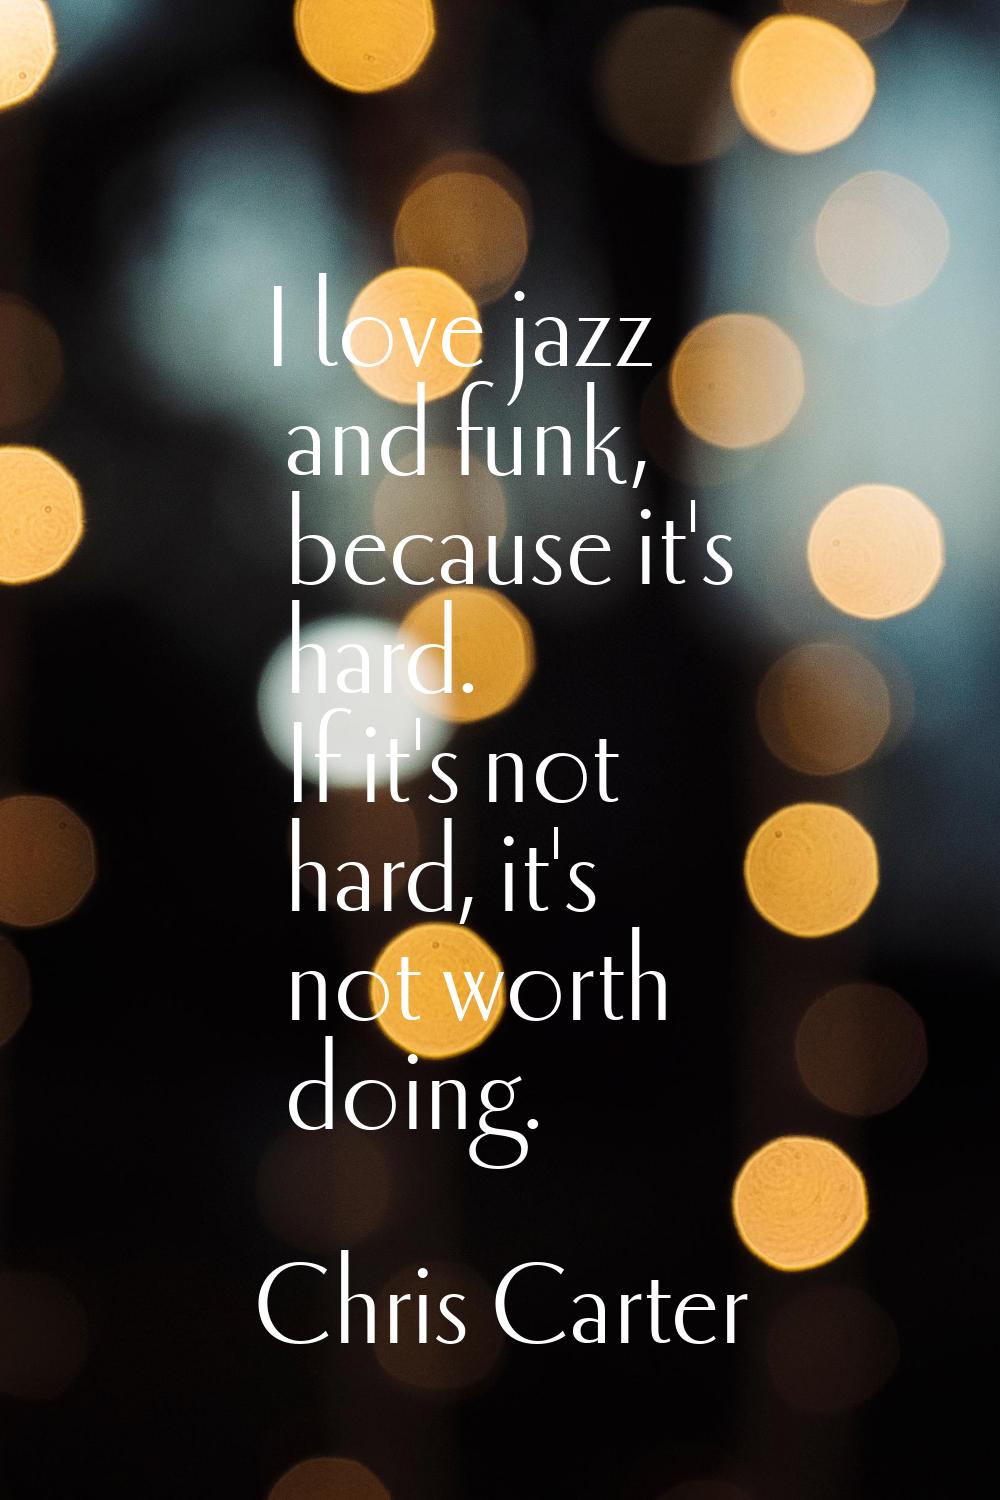 I love jazz and funk, because it's hard. If it's not hard, it's not worth doing.